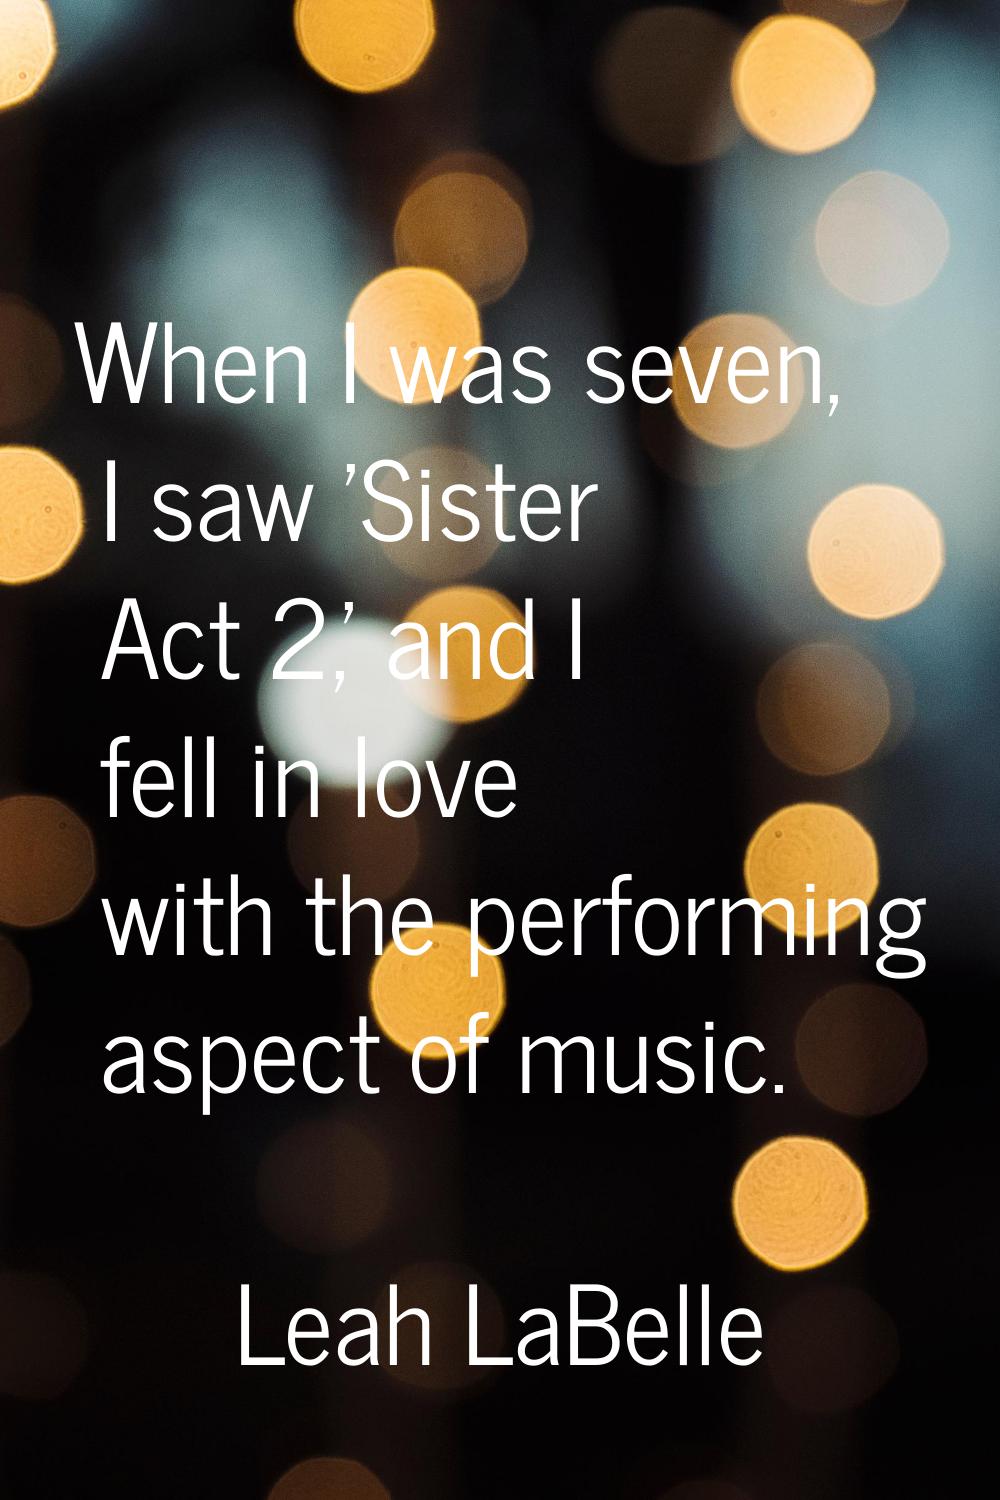 When I was seven, I saw 'Sister Act 2,' and I fell in love with the performing aspect of music.